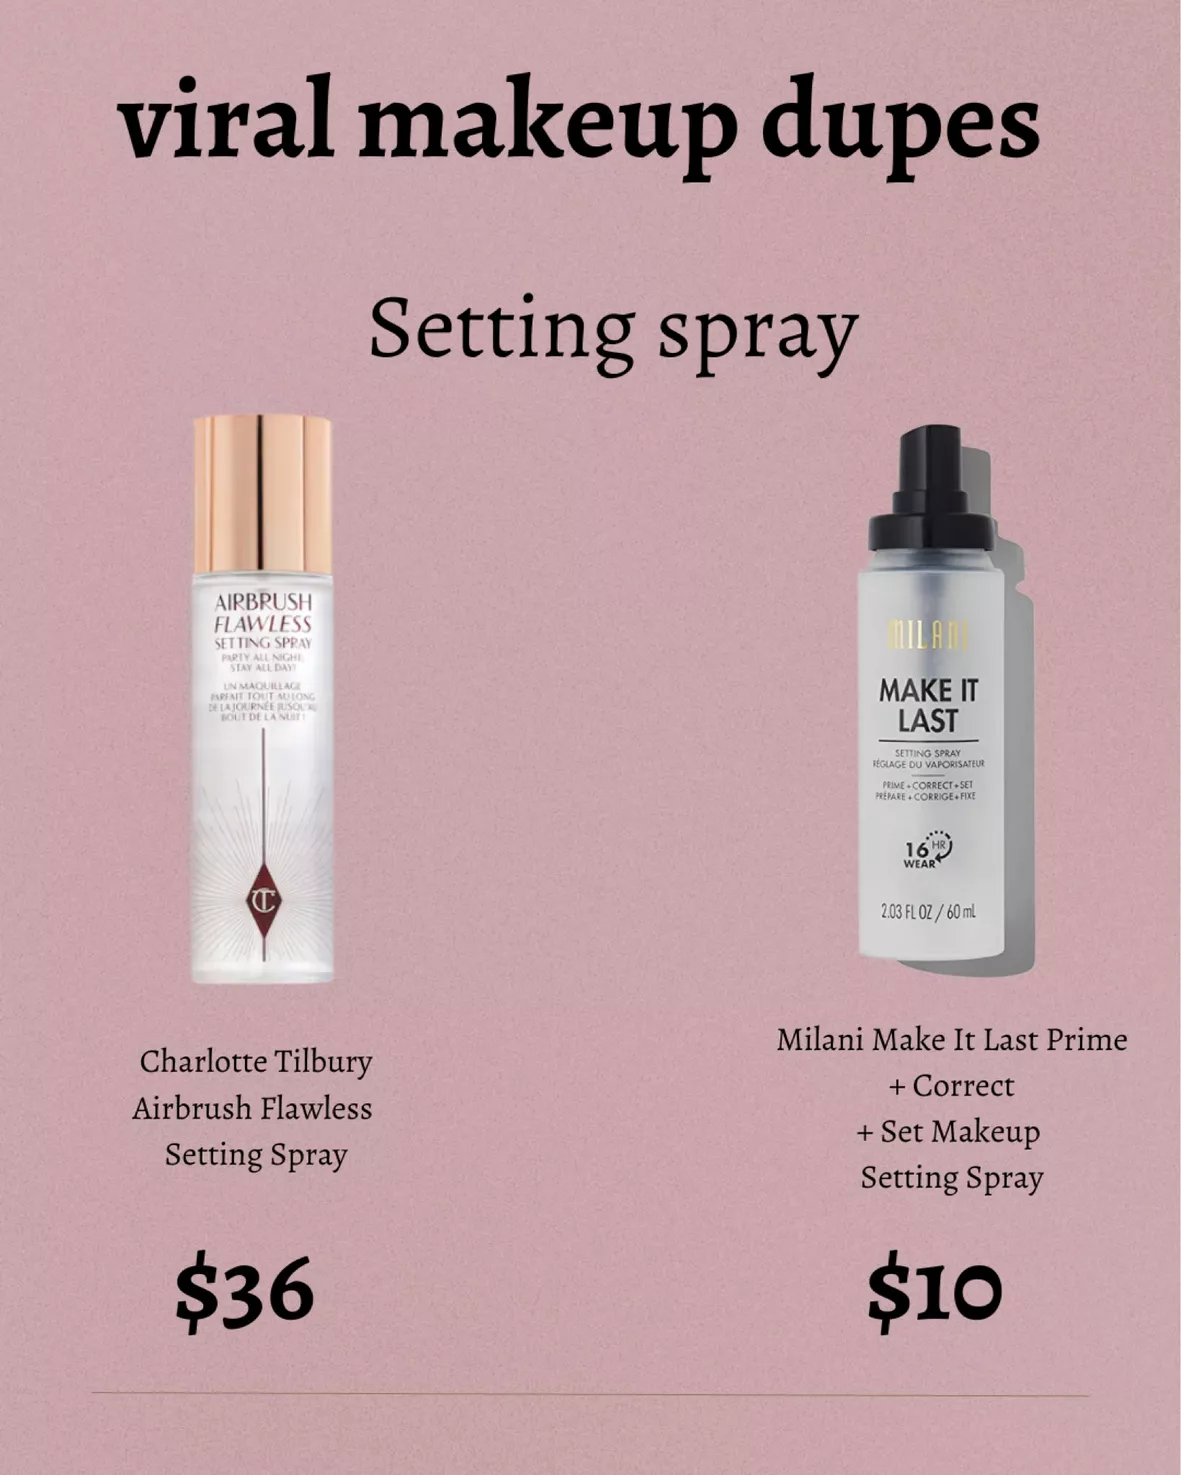 I tried the viral $5 setting spray against the Charlotte Tilbury option and  it was a nearly perfect dupe for $33 less